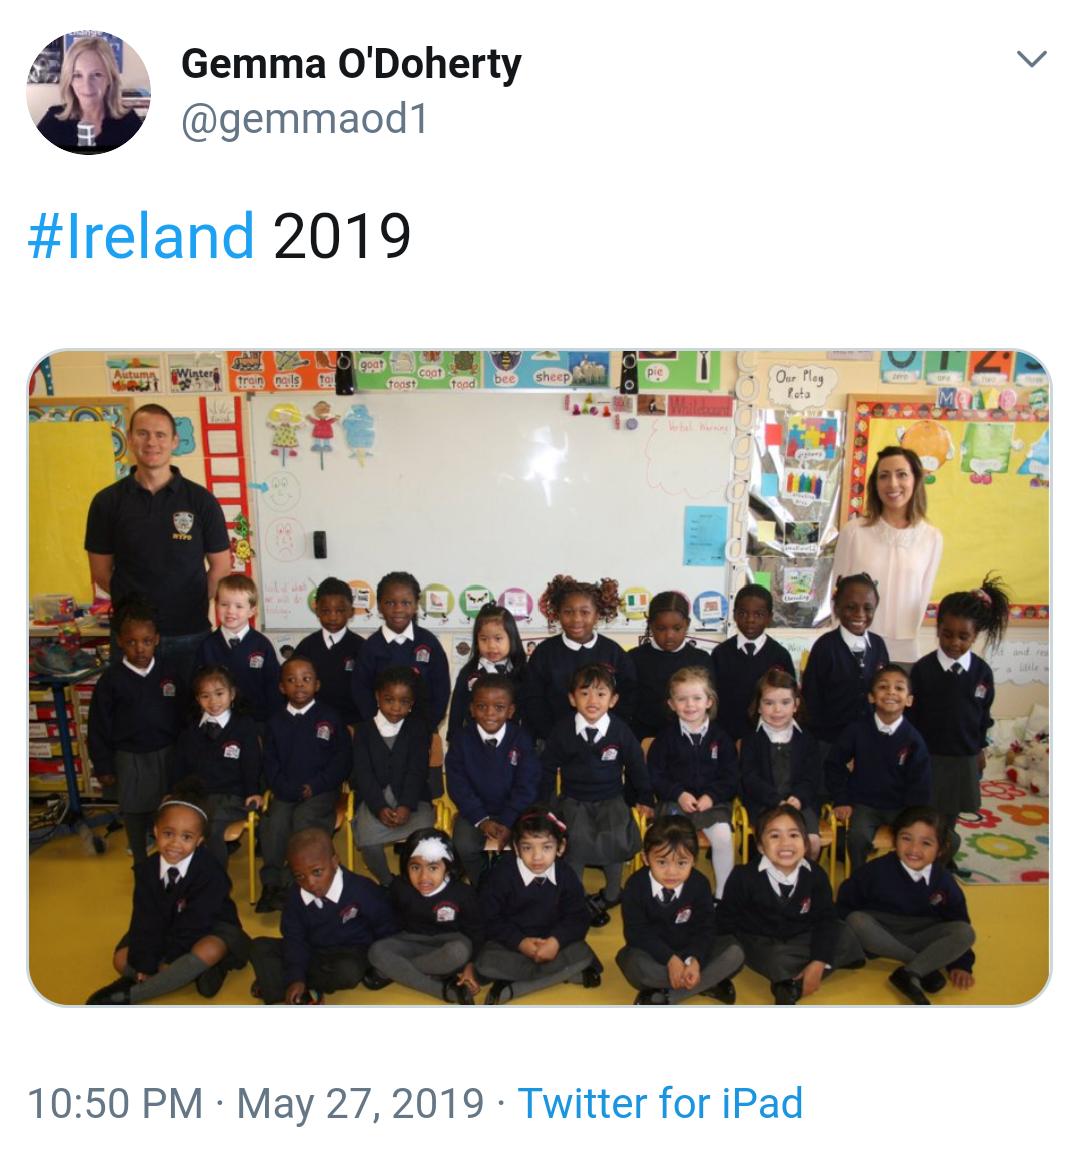 What prompted me to do this is actually a photo she tweeted yesterday - a racist dogwhistle - and I wanted to see if the hatred was always a theme for her.The tweet/photo is below and it's absolutely adorable I hope you'll agree.  /13